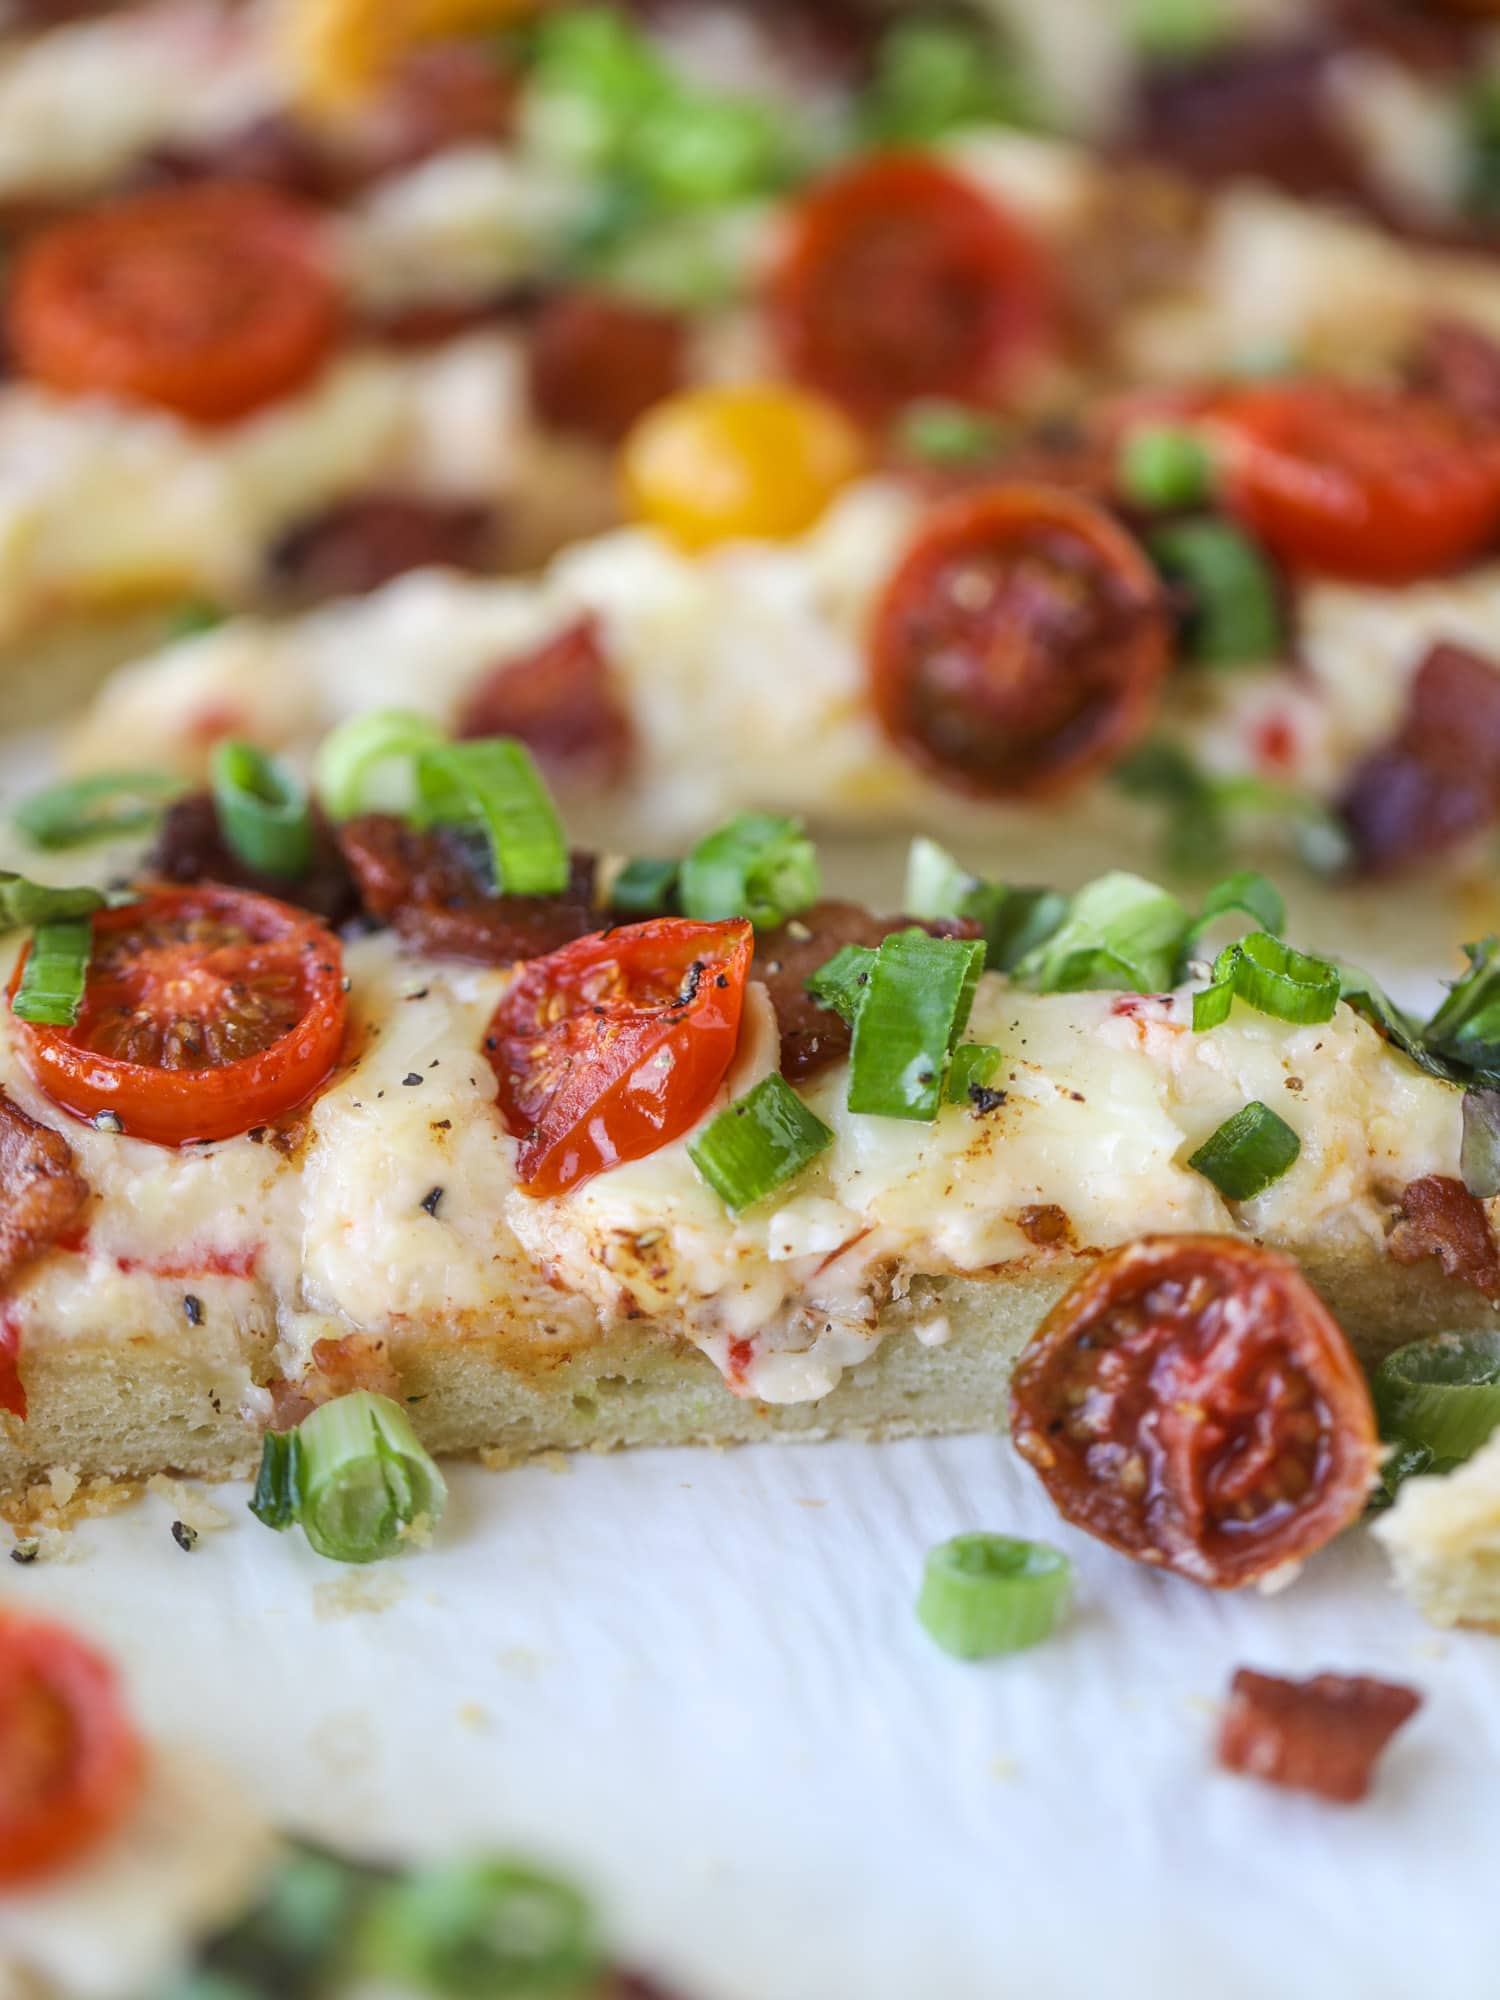 A crisped flatbread crust is topped with creamy pimento cheese, crispy bacon, garlic burst tomatoes and shredded lettuce. It's a flavor explosion!